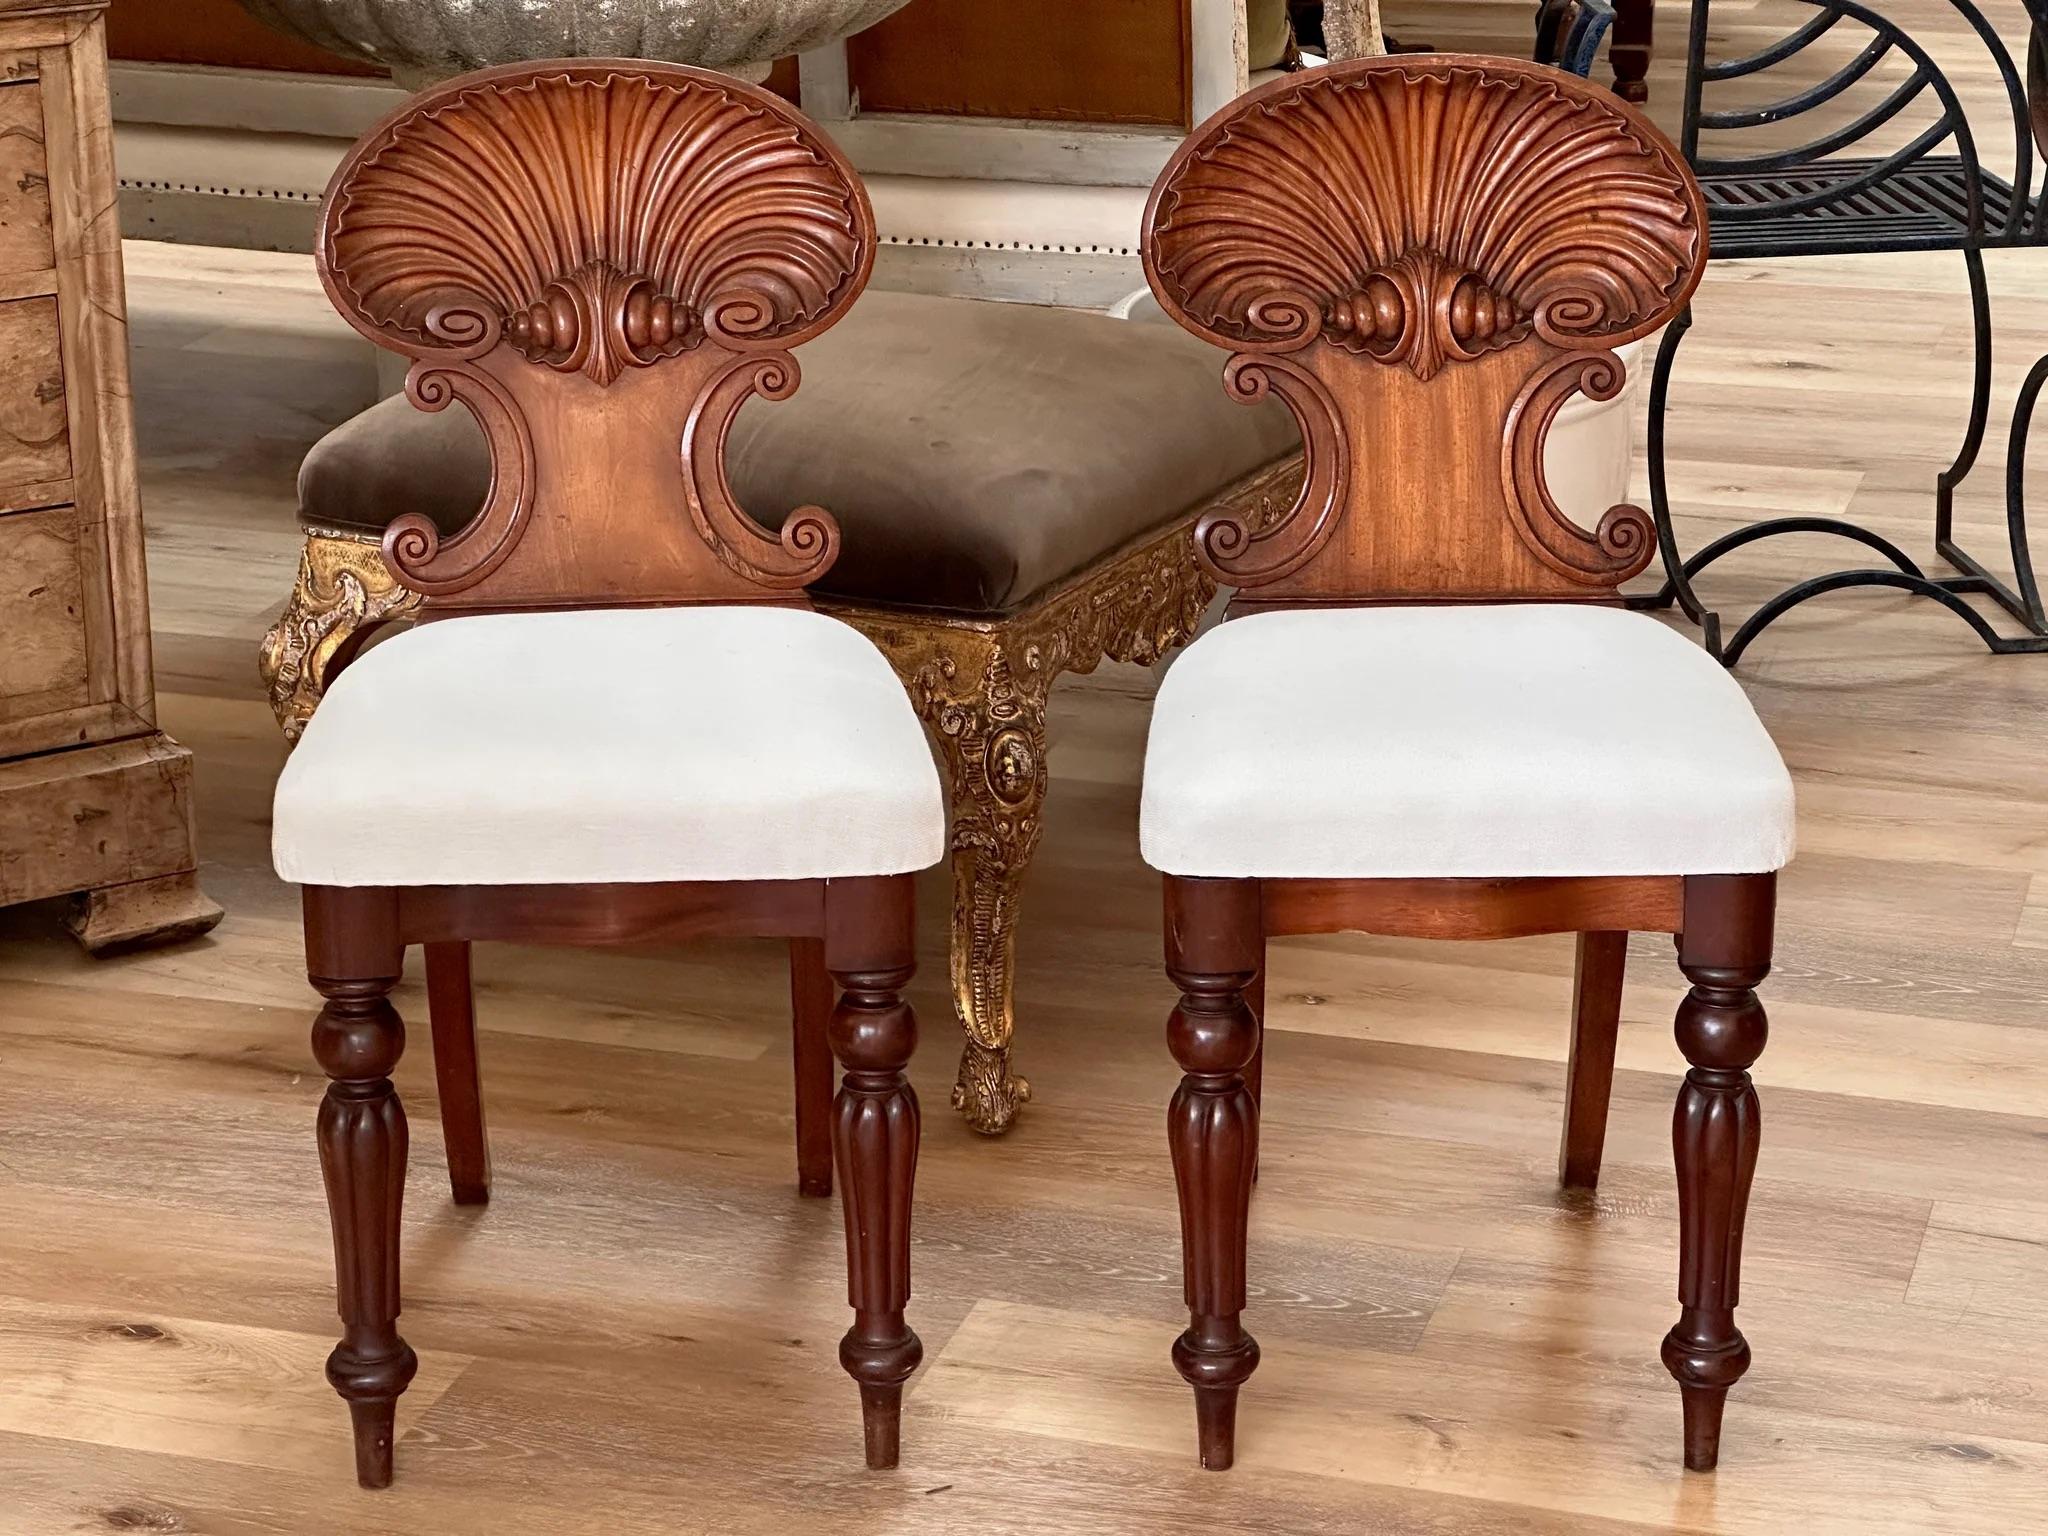 Northern Irish Pair of Shell-Back Hall Chairs, Late 18th-Early 19th Century